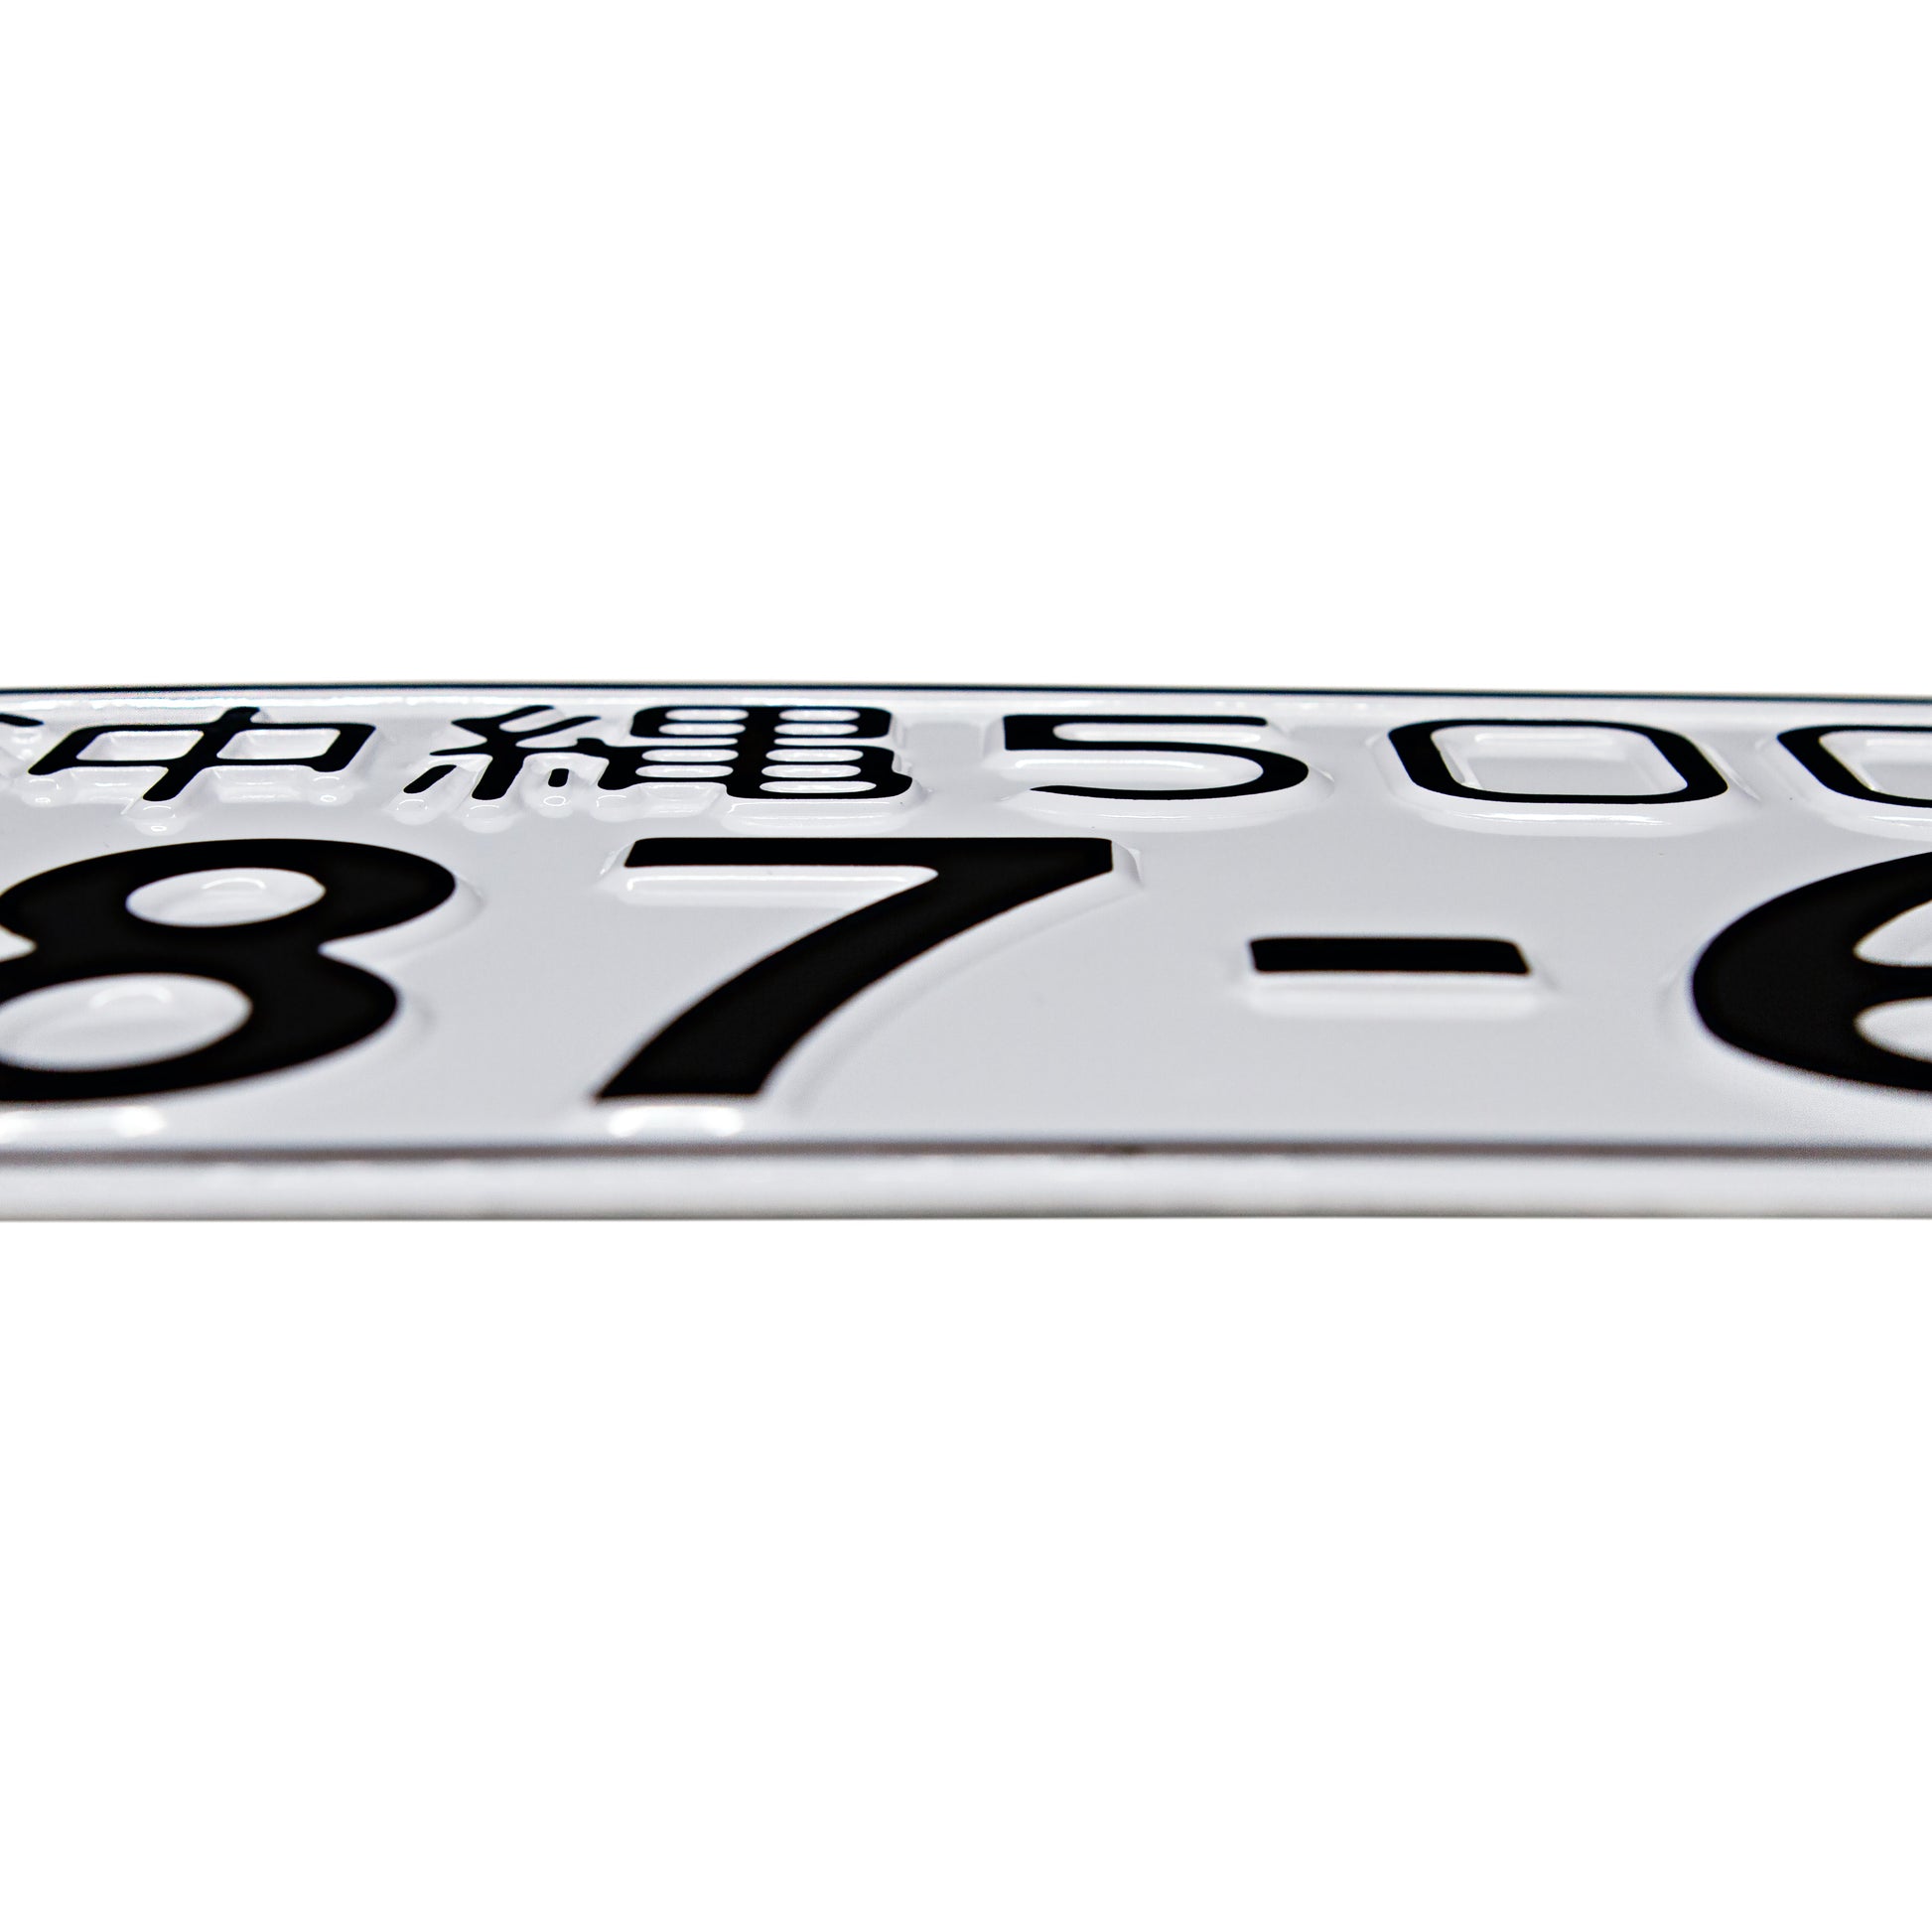 Japanese license plate gloss white with black text embossed text